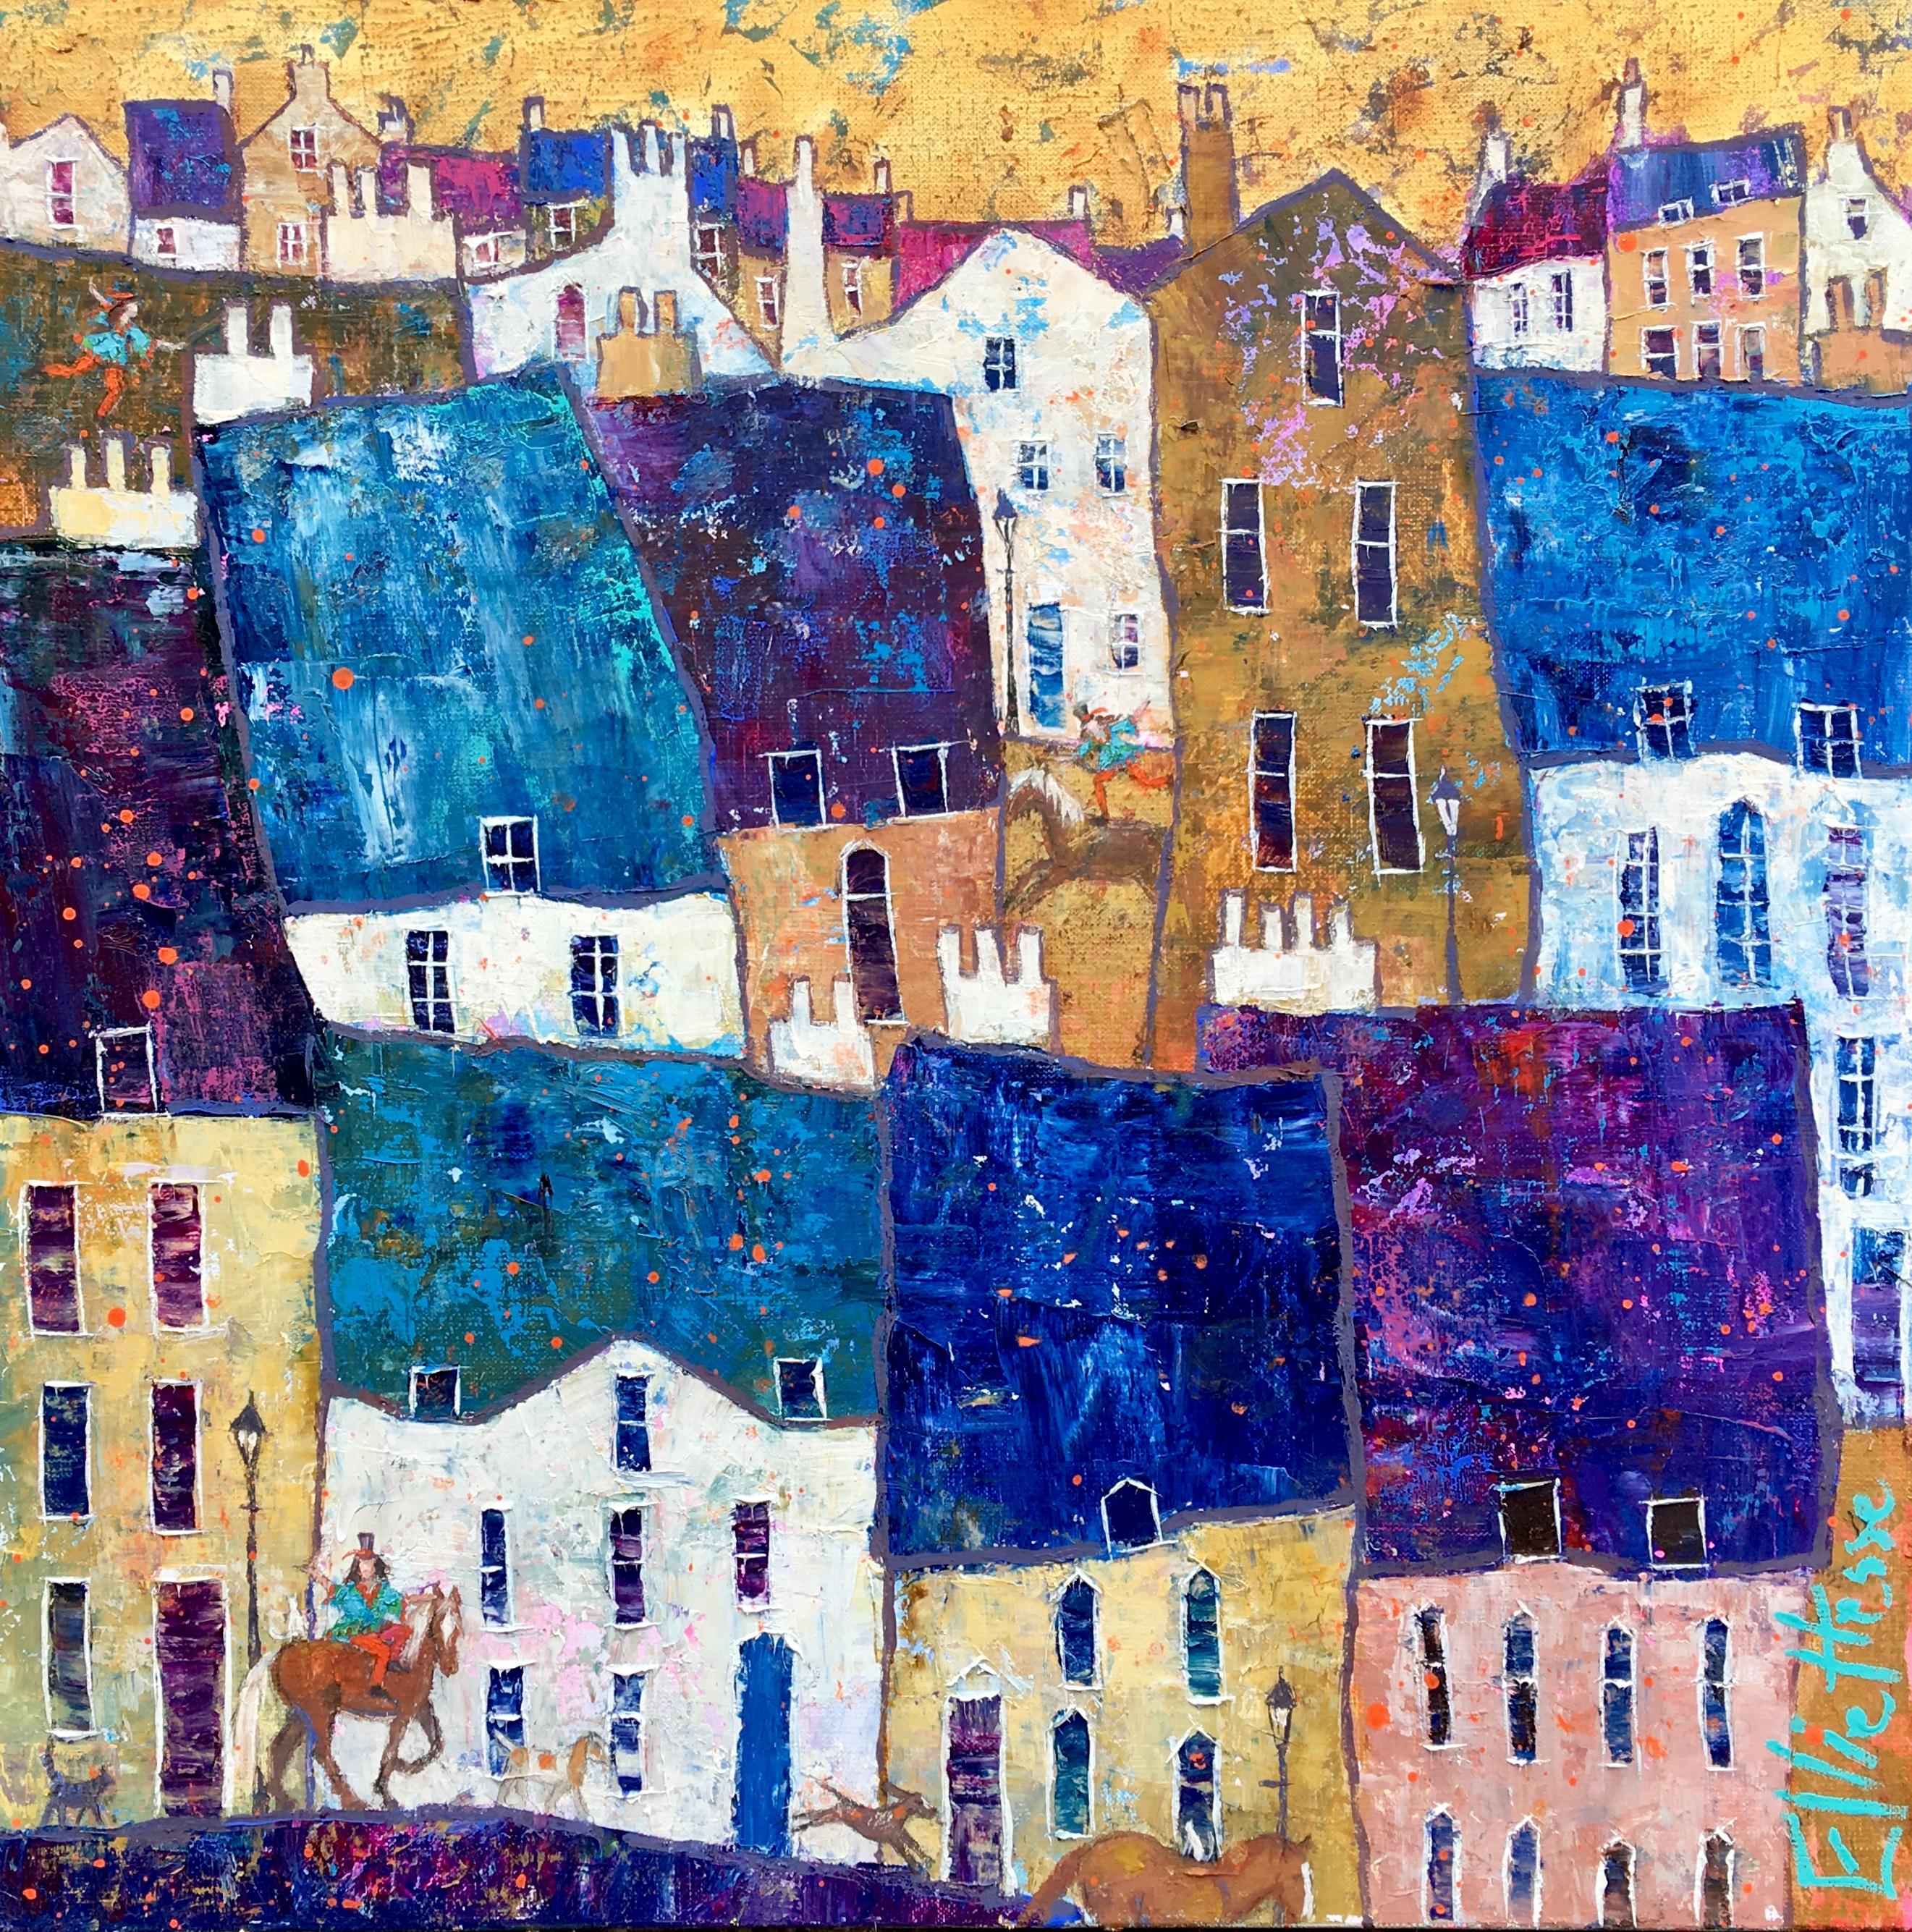 Ellie Hesse Figurative Painting - Me, Myself and I -vibrant blue and white townscape horse oil on canvas